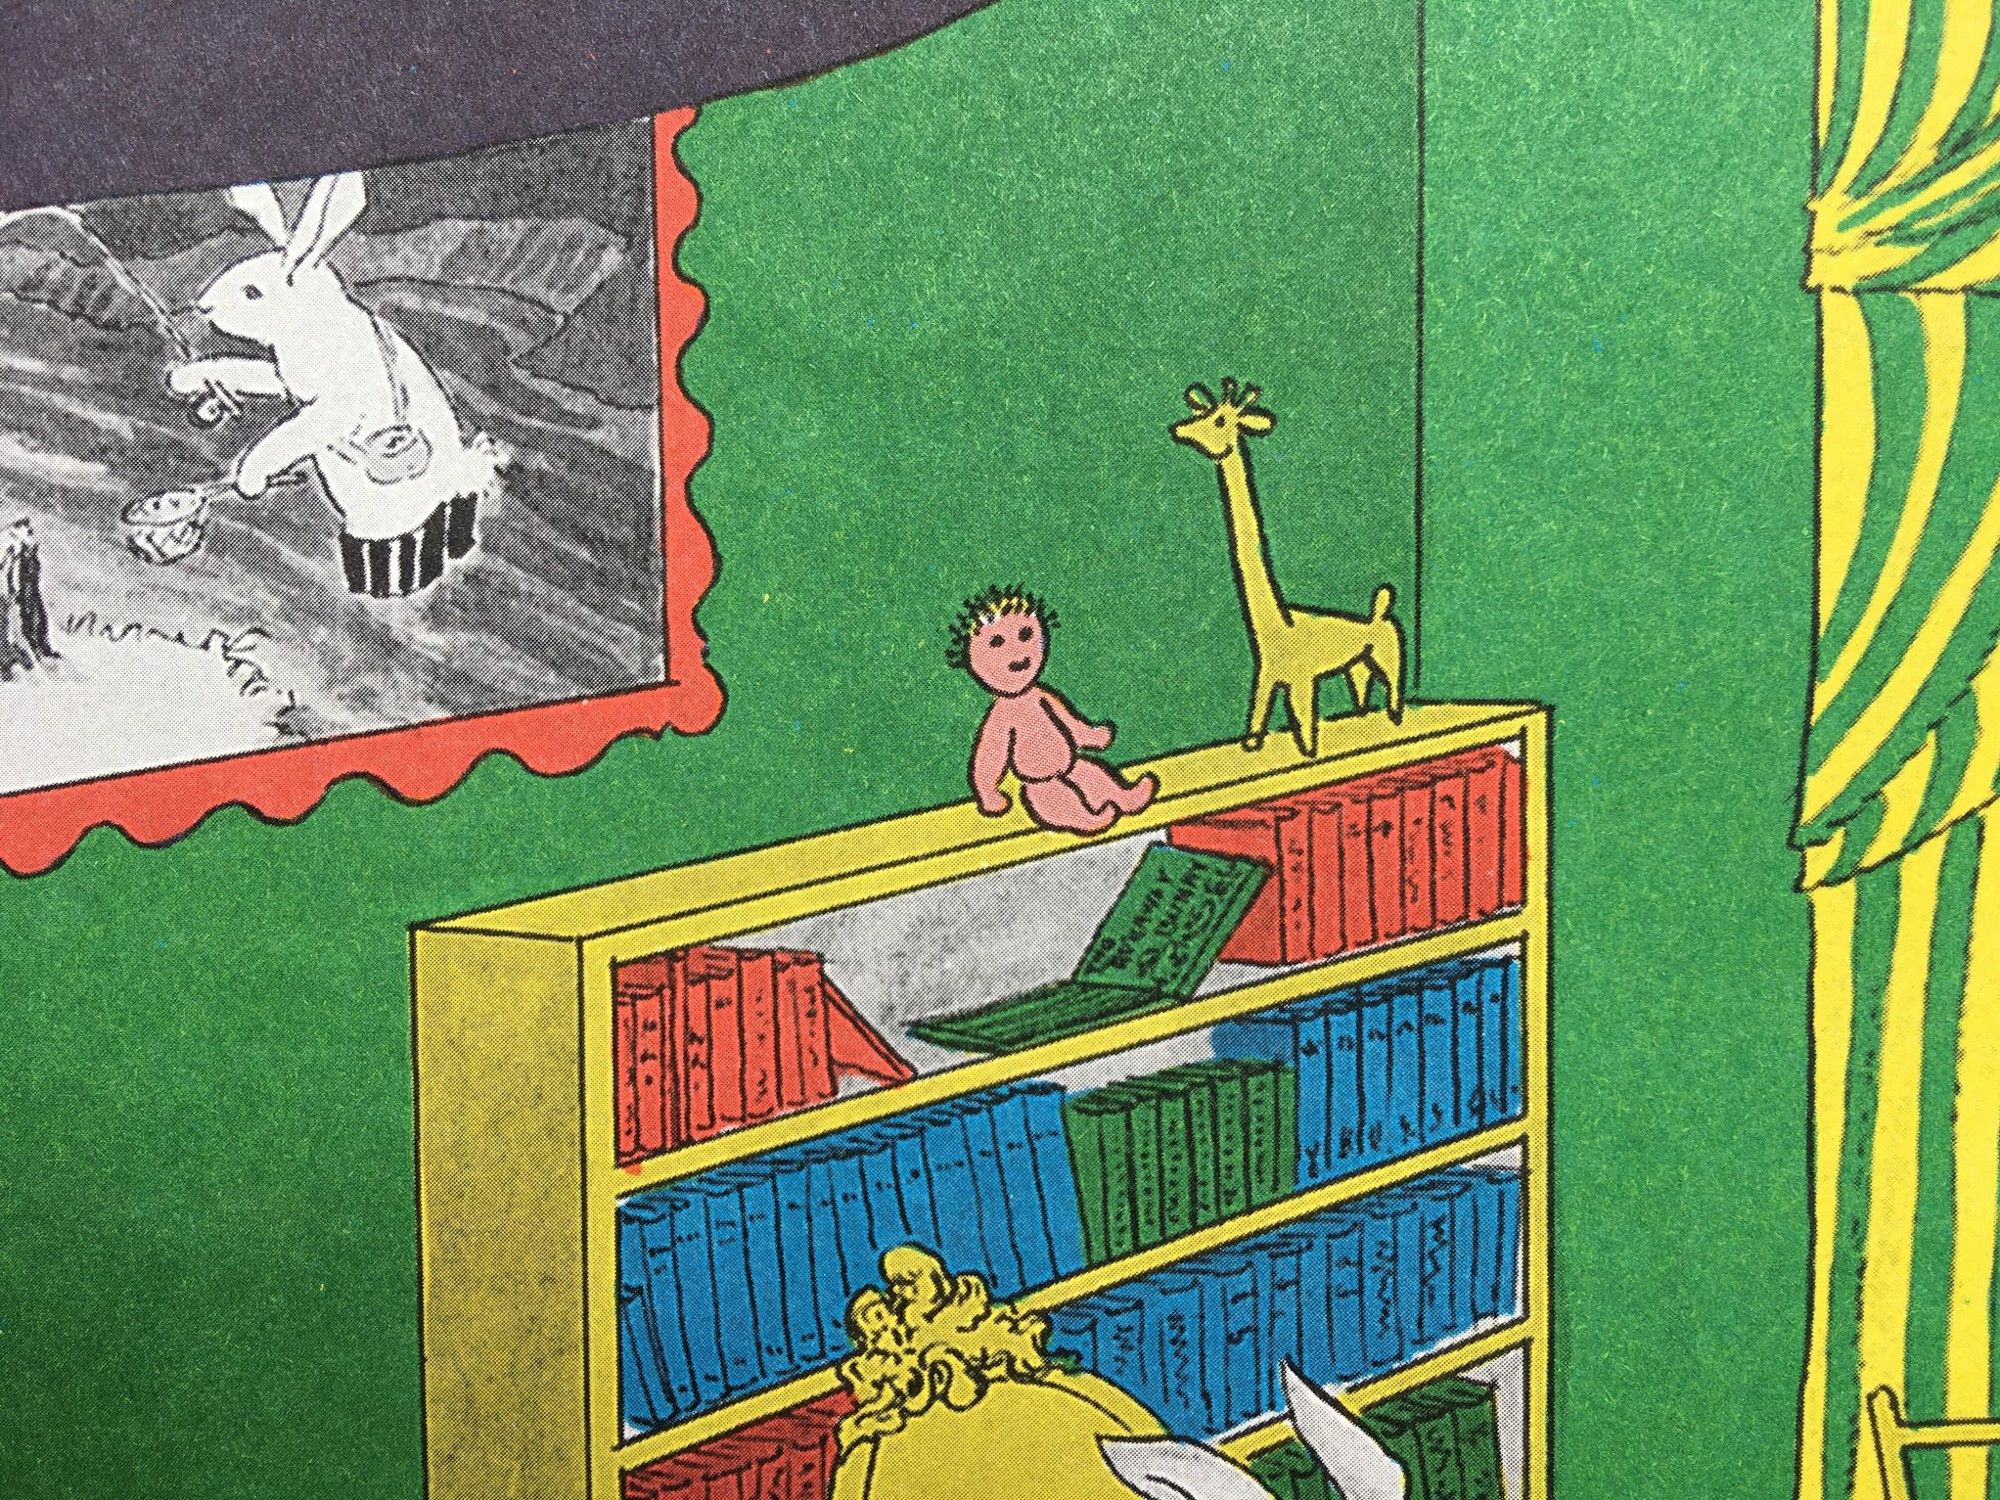 5 Easter Eggs In Goodnight Moon